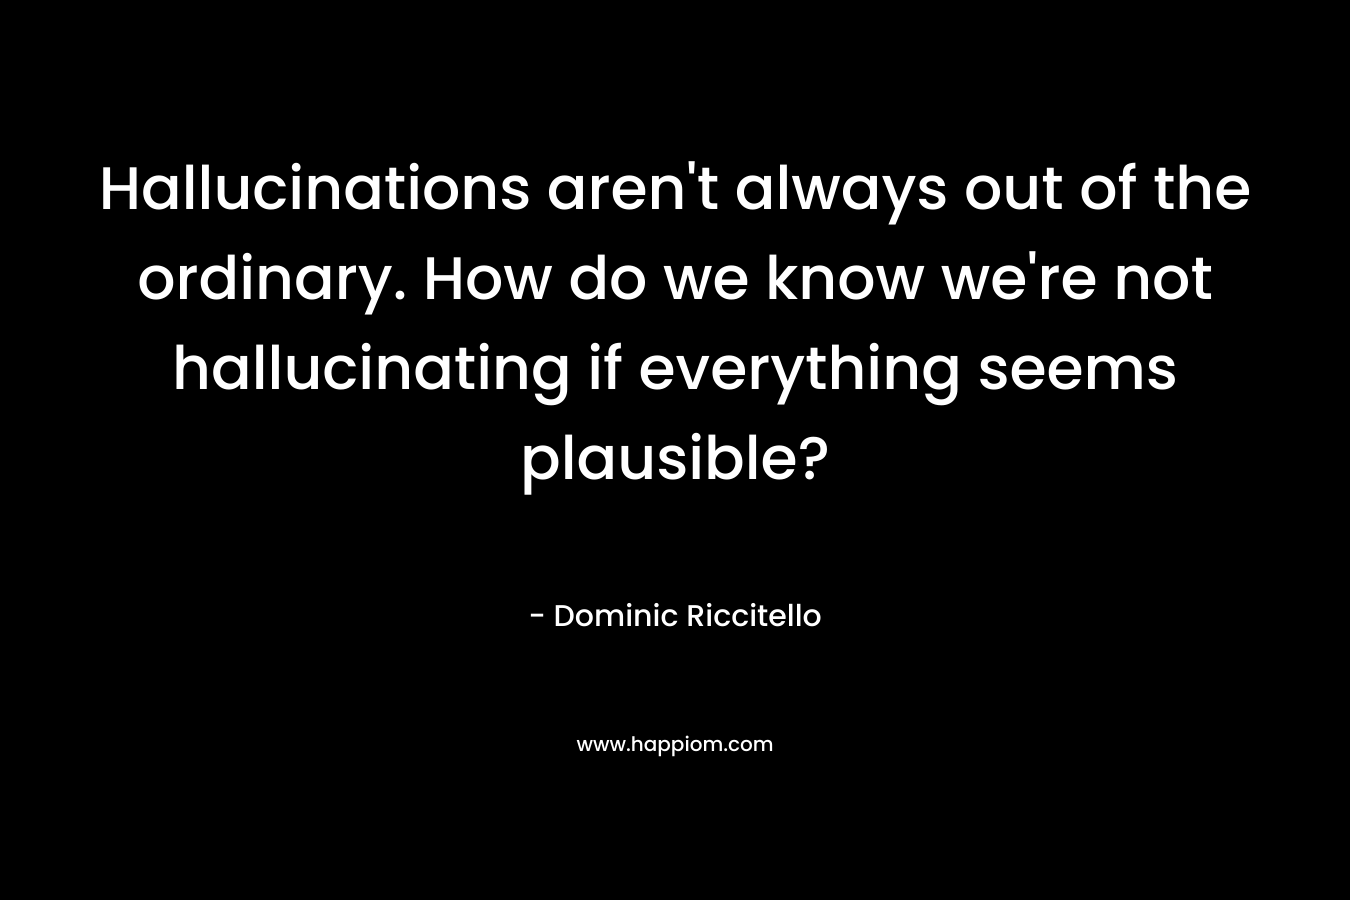 Hallucinations aren’t always out of the ordinary. How do we know we’re not hallucinating if everything seems plausible? – Dominic Riccitello